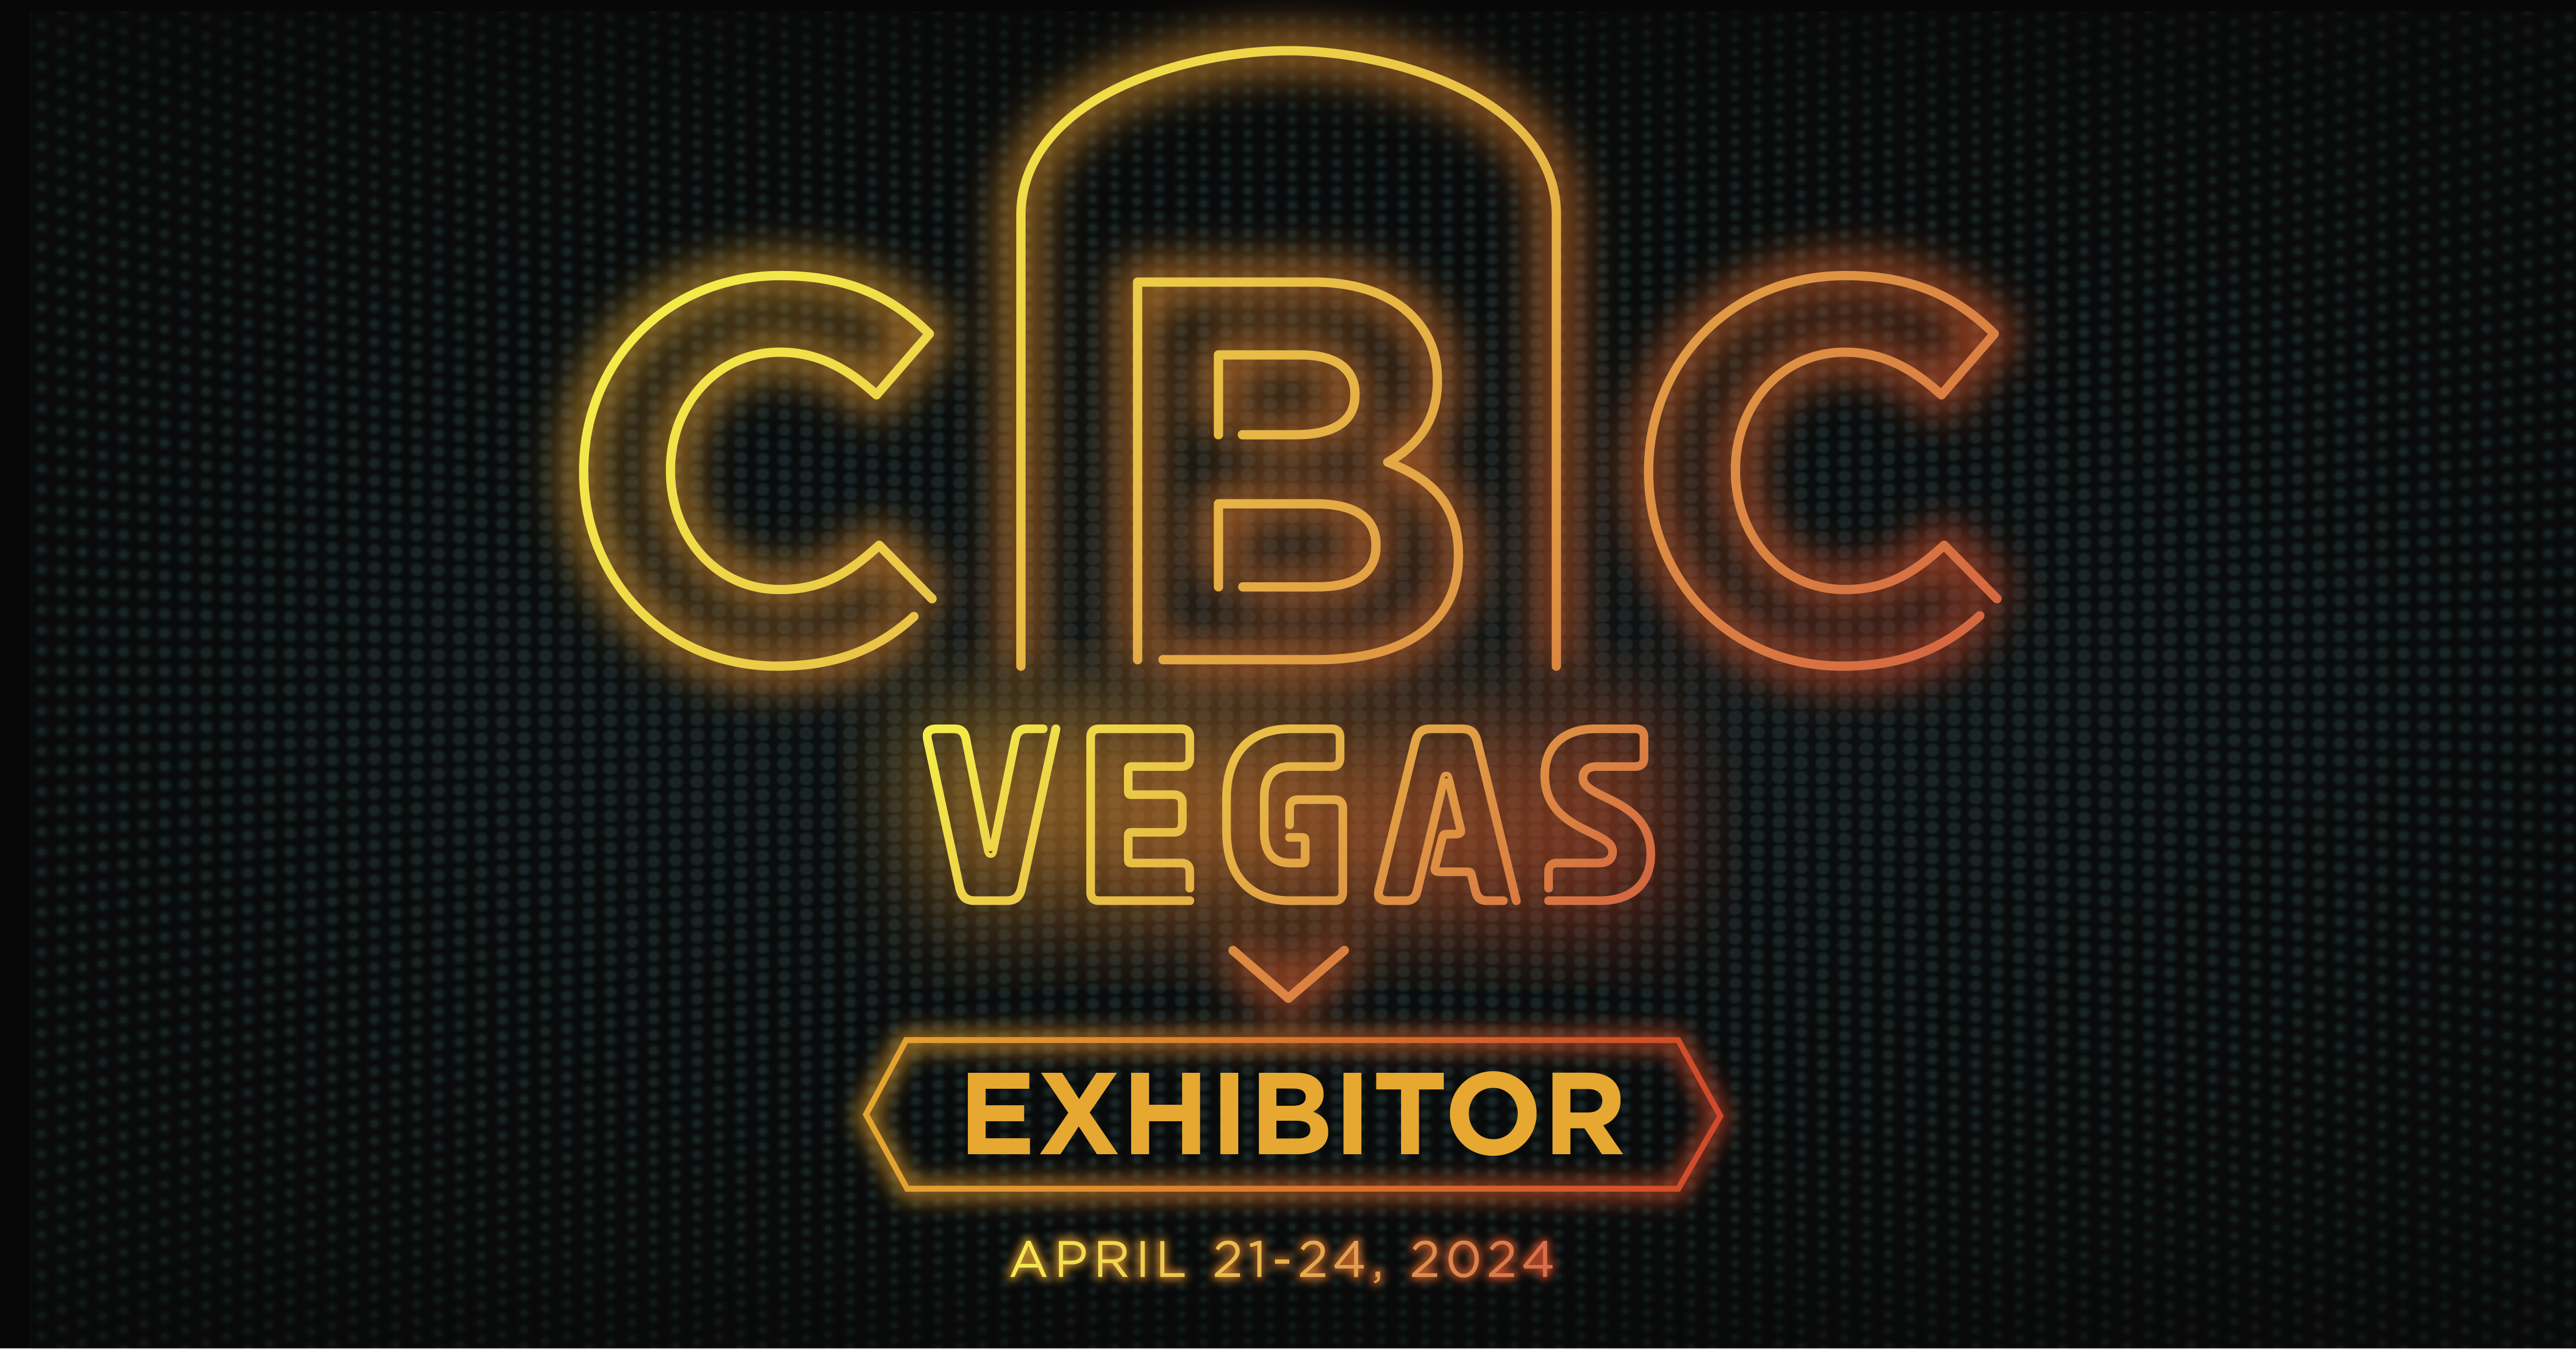 Viva Las Vegas—We Want to See You at CBC!